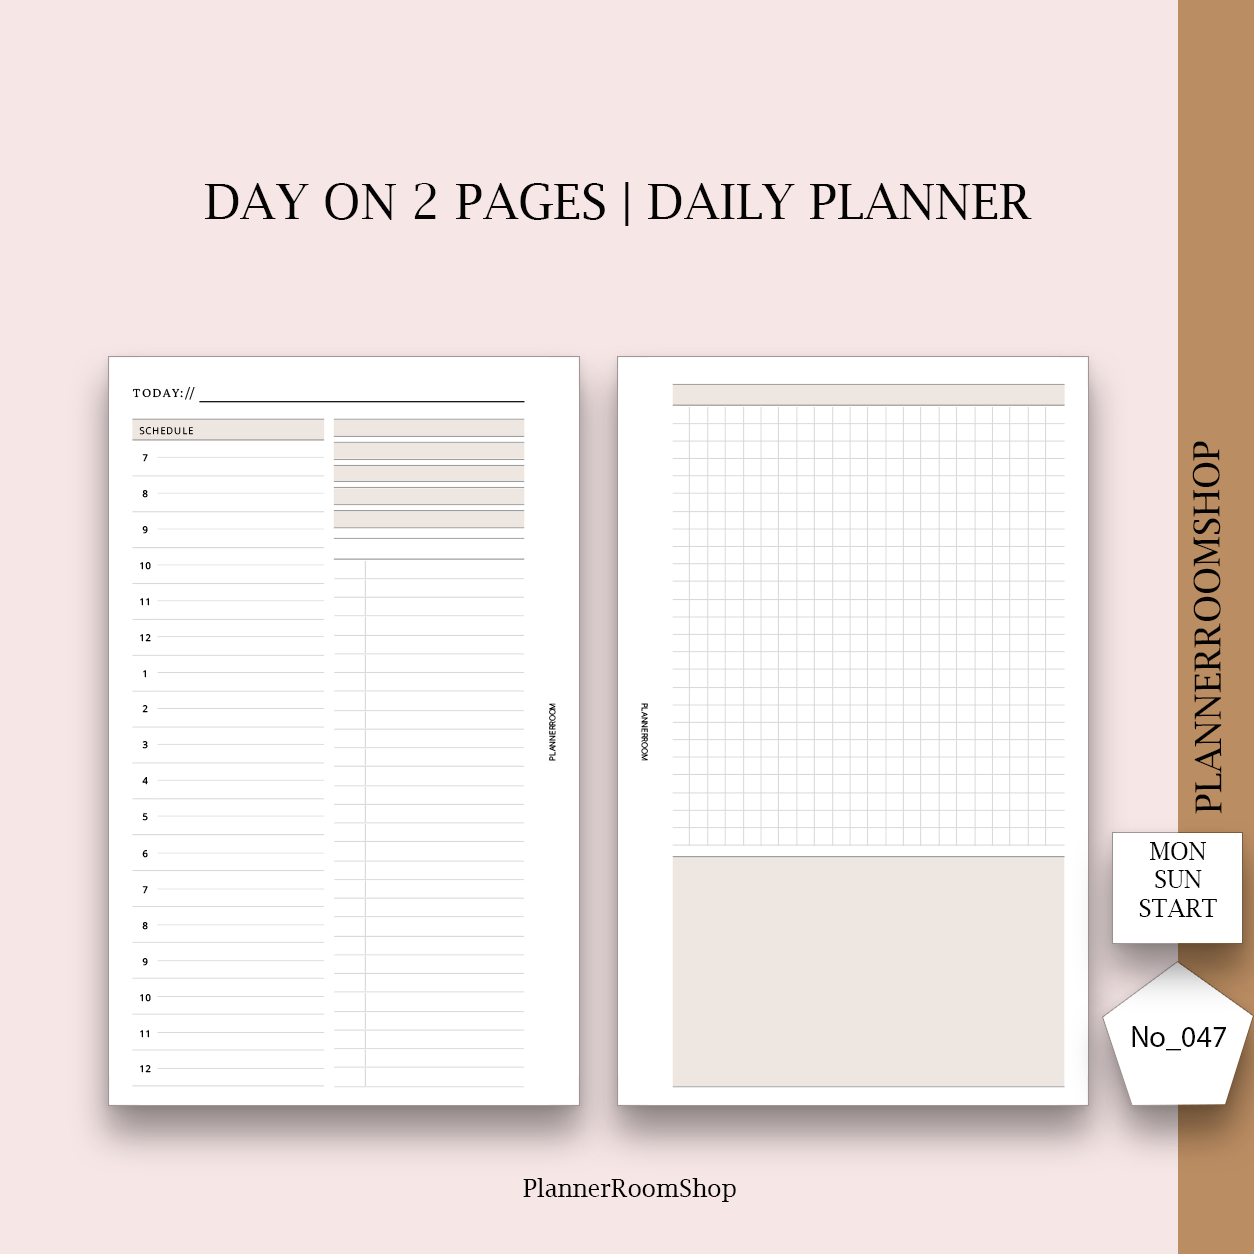 Day on 2 pages | Printable planner - 047